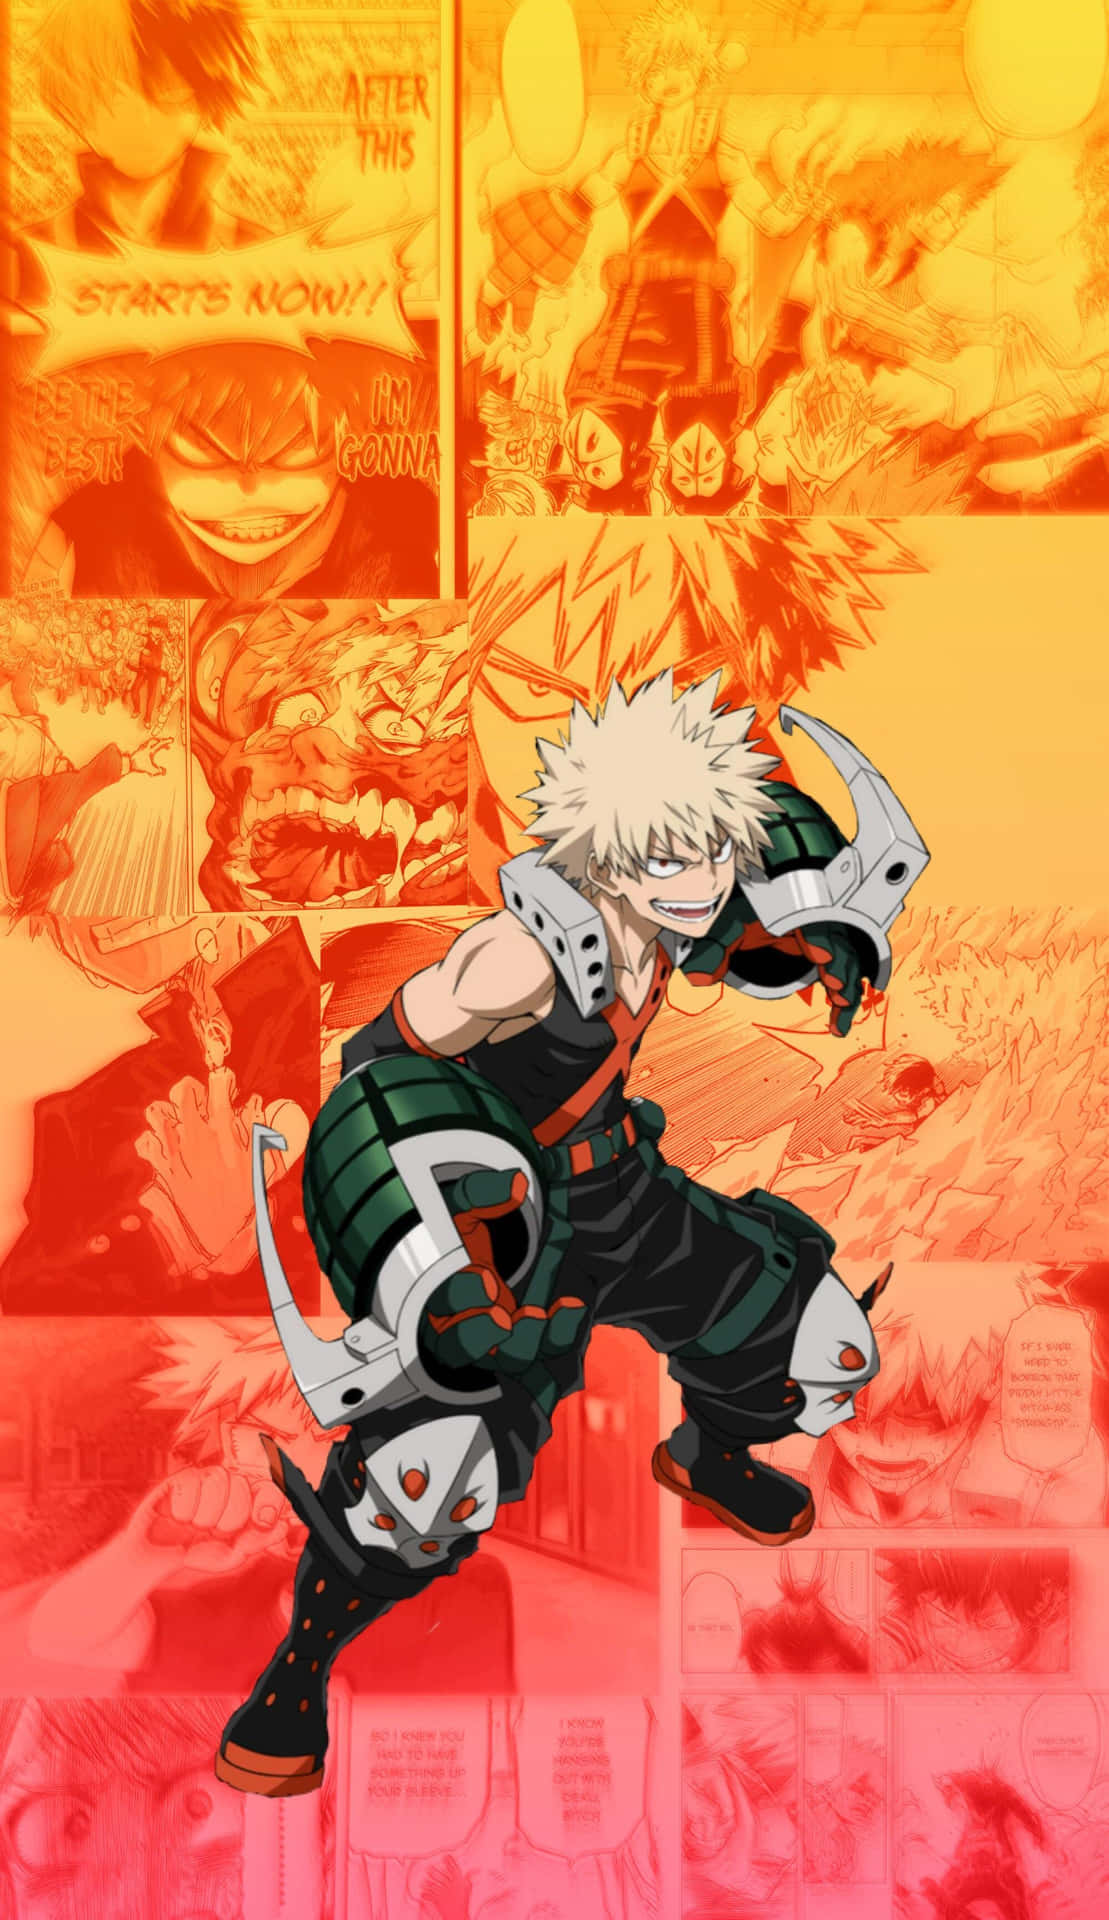 Bakugou with an intense expression and attitude 🔥 Wallpaper